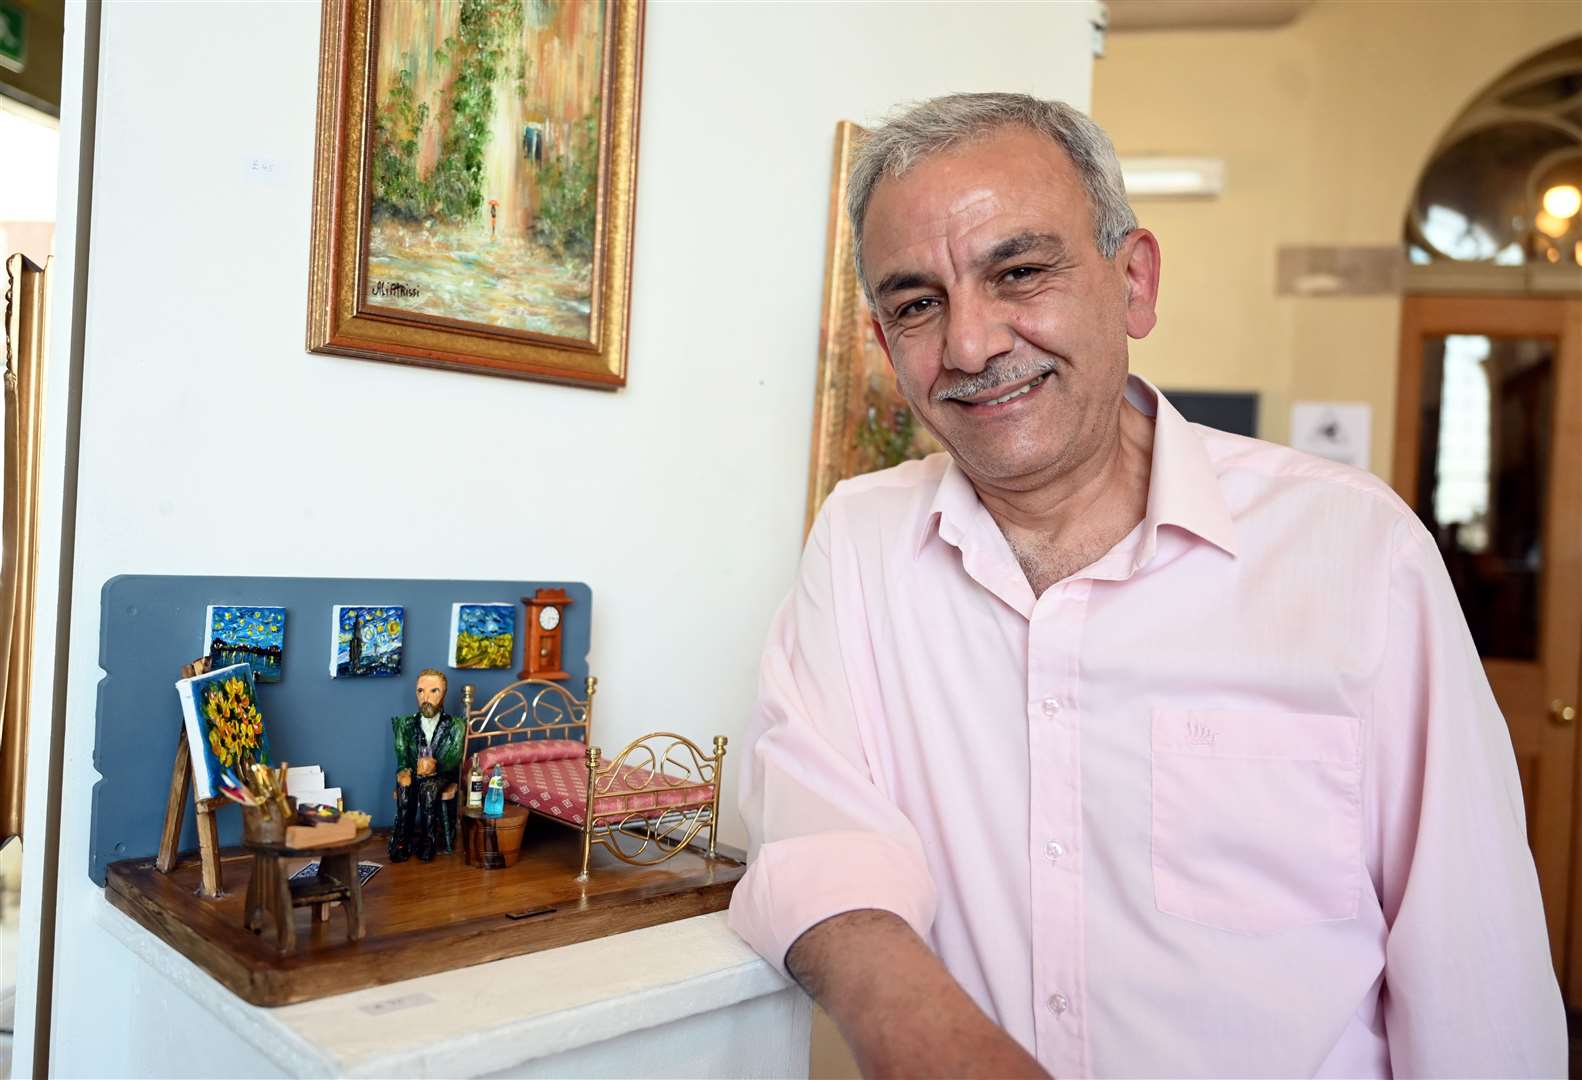 Ali Atrissi with his miniature model and paintings